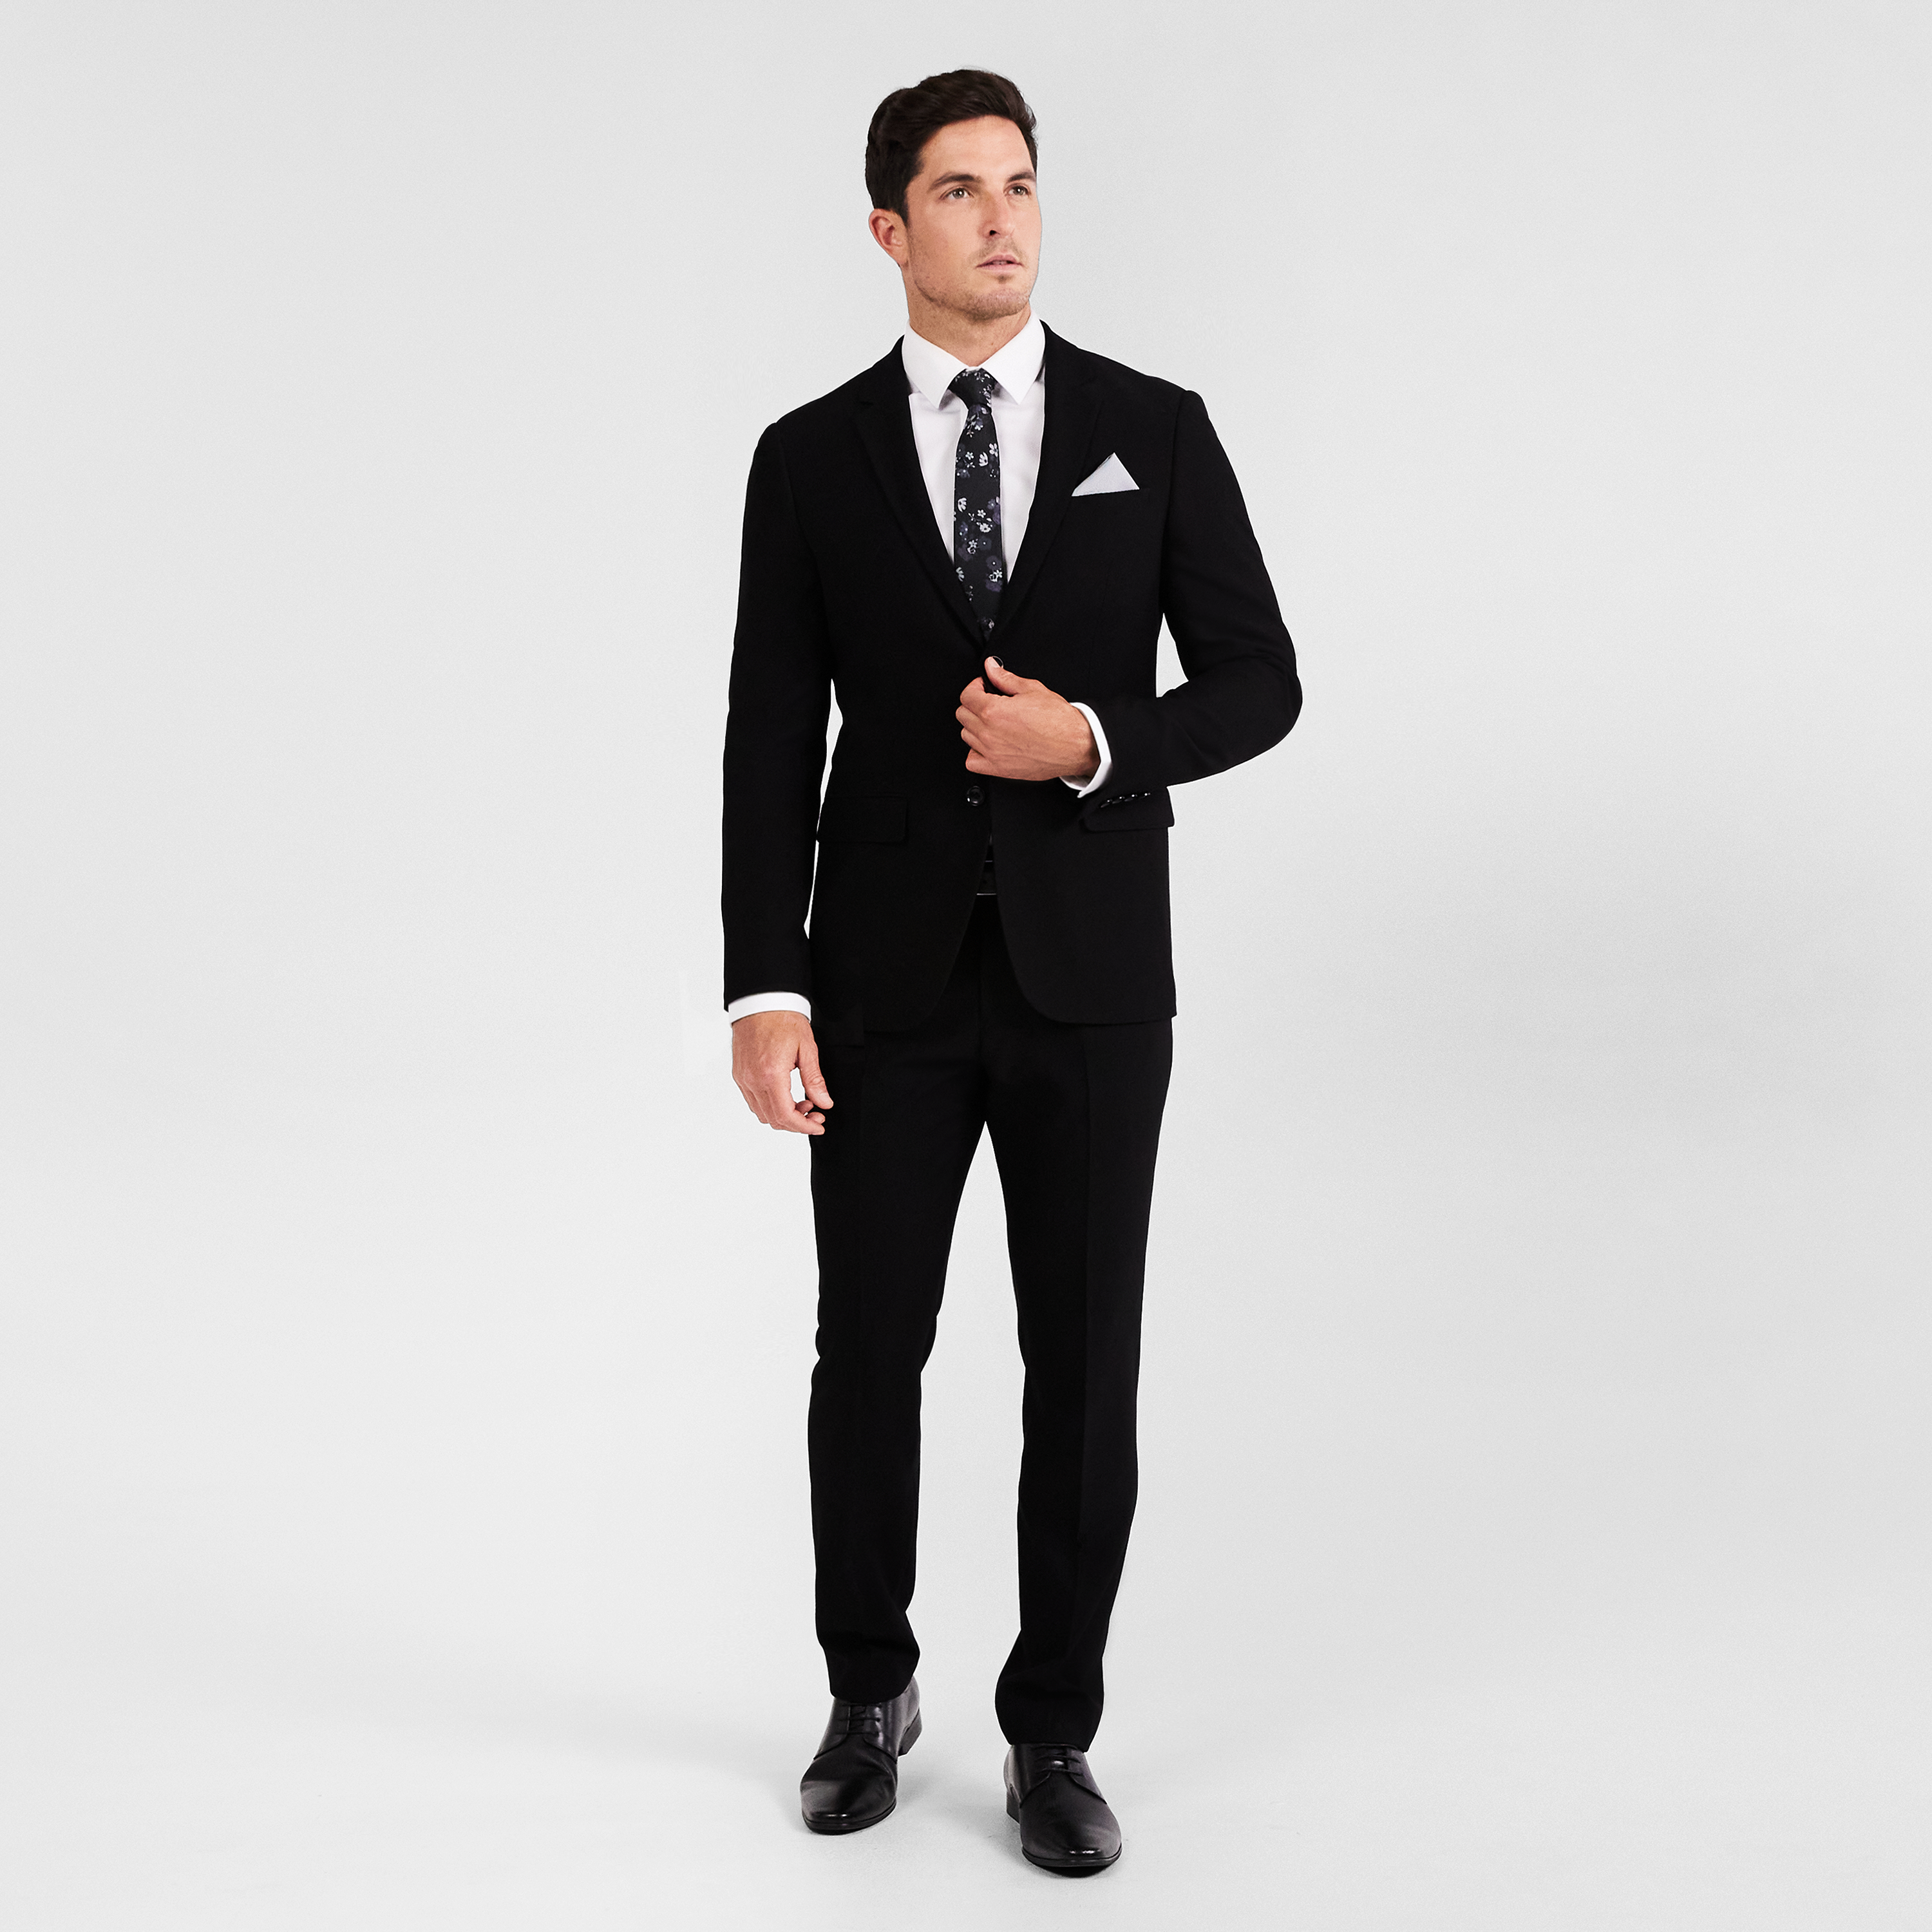 Black tie dress code decoded | SUITSUPPLY US